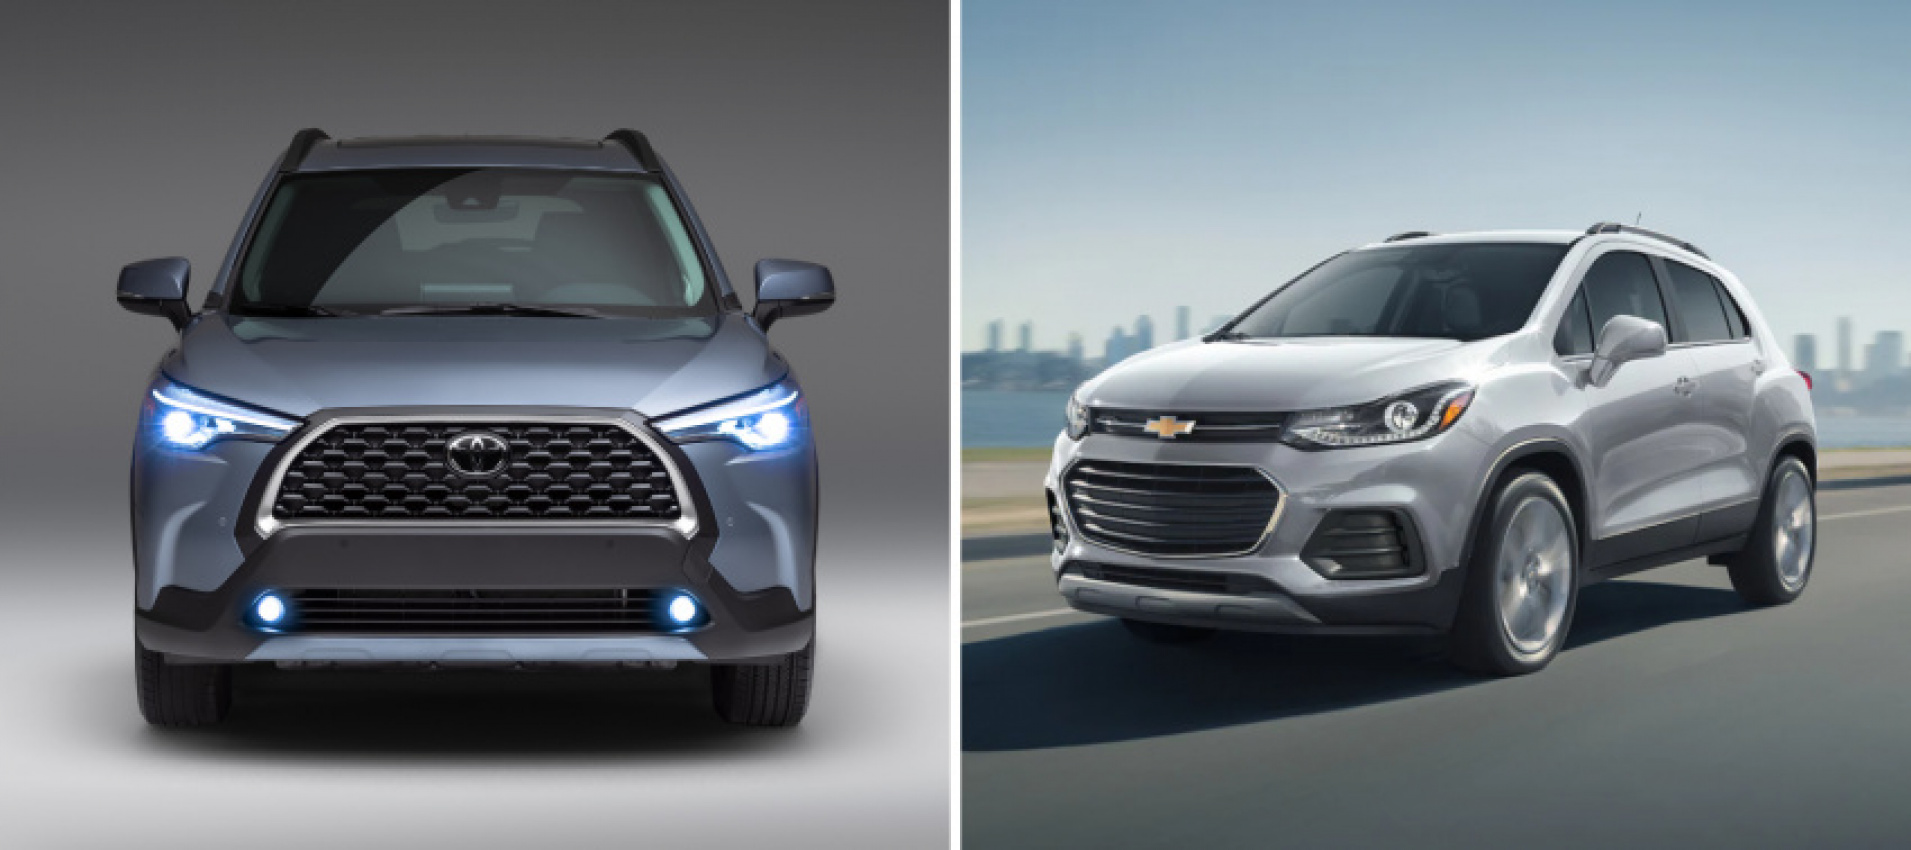 android, autos, cars, toyota, amazon, comparison, corolla cross, toyota corolla cross, trax, amazon, android, 2022 toyota corolla cross blows away the 2022 chevy trax in a side-by-side comparison